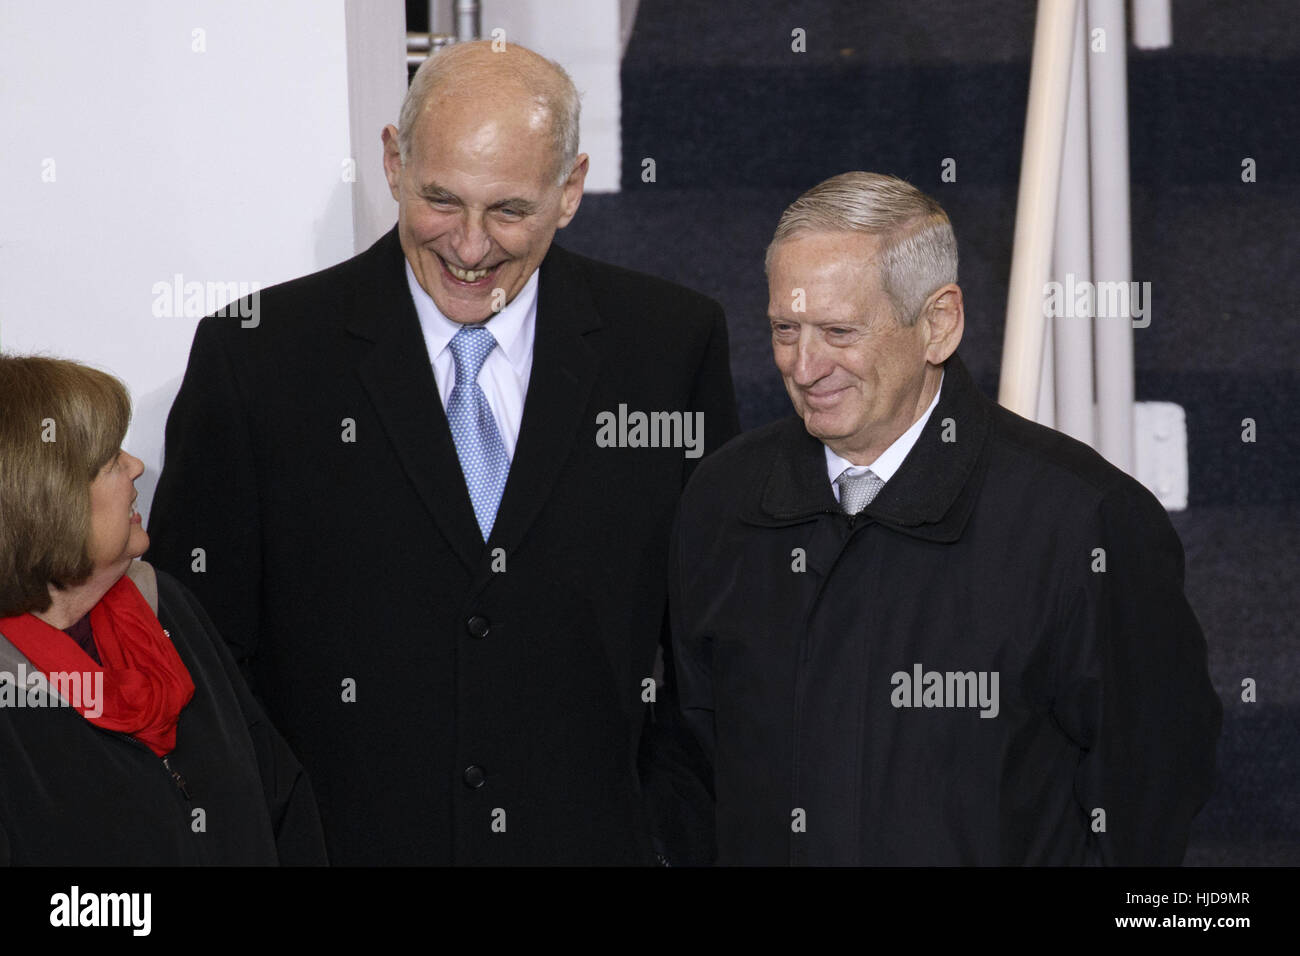 Washington, DC, USA. 20th Jan, 2017. Retired Marine Corps General John F. Kelly, Secretary of Homeland Security, center, and James Mattis, Secretary of Defense, right, attend the inauguration parade of Donald J. Trump as 45th President of the United States in front of the White House on Friday, January 20, 2017 in Washington, DC © 2017 Patrick T. Fallon Credit: Patrick Fallon/ZUMA Wire/Alamy Live News Stock Photo